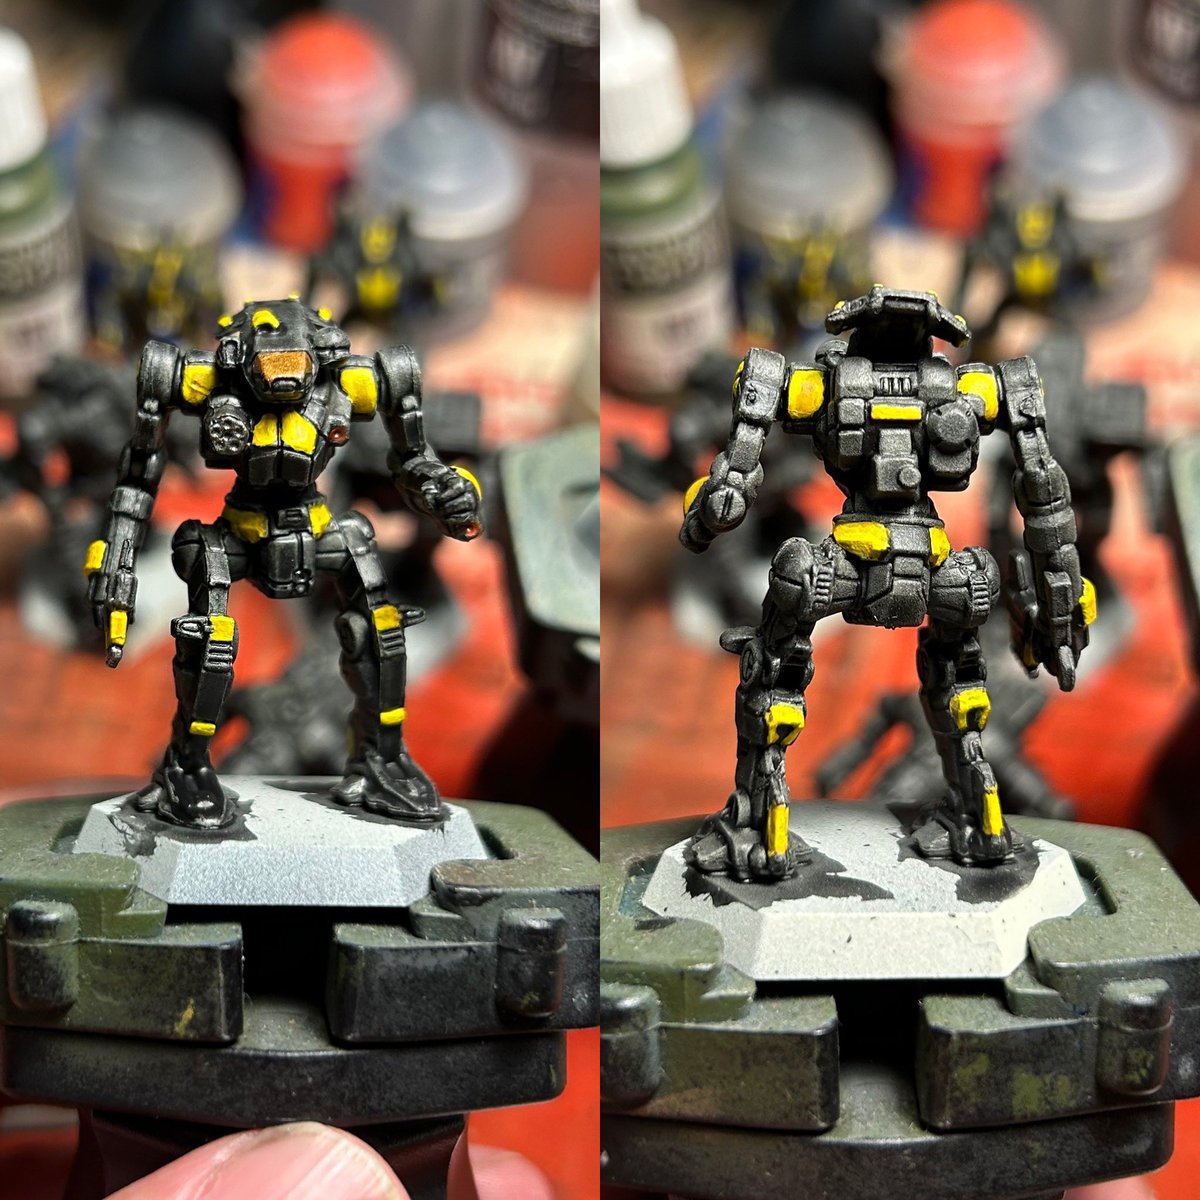 It hacks! It slashes!  It julienne fries! I present the Hatchetman!!! (Insert applause) Figured I’d try to get some painting in despite being sunburned.  Note that I plan on hitting some of the silver spots with jem paints later. 

#battletechgame #battletech @catalystgamelabs